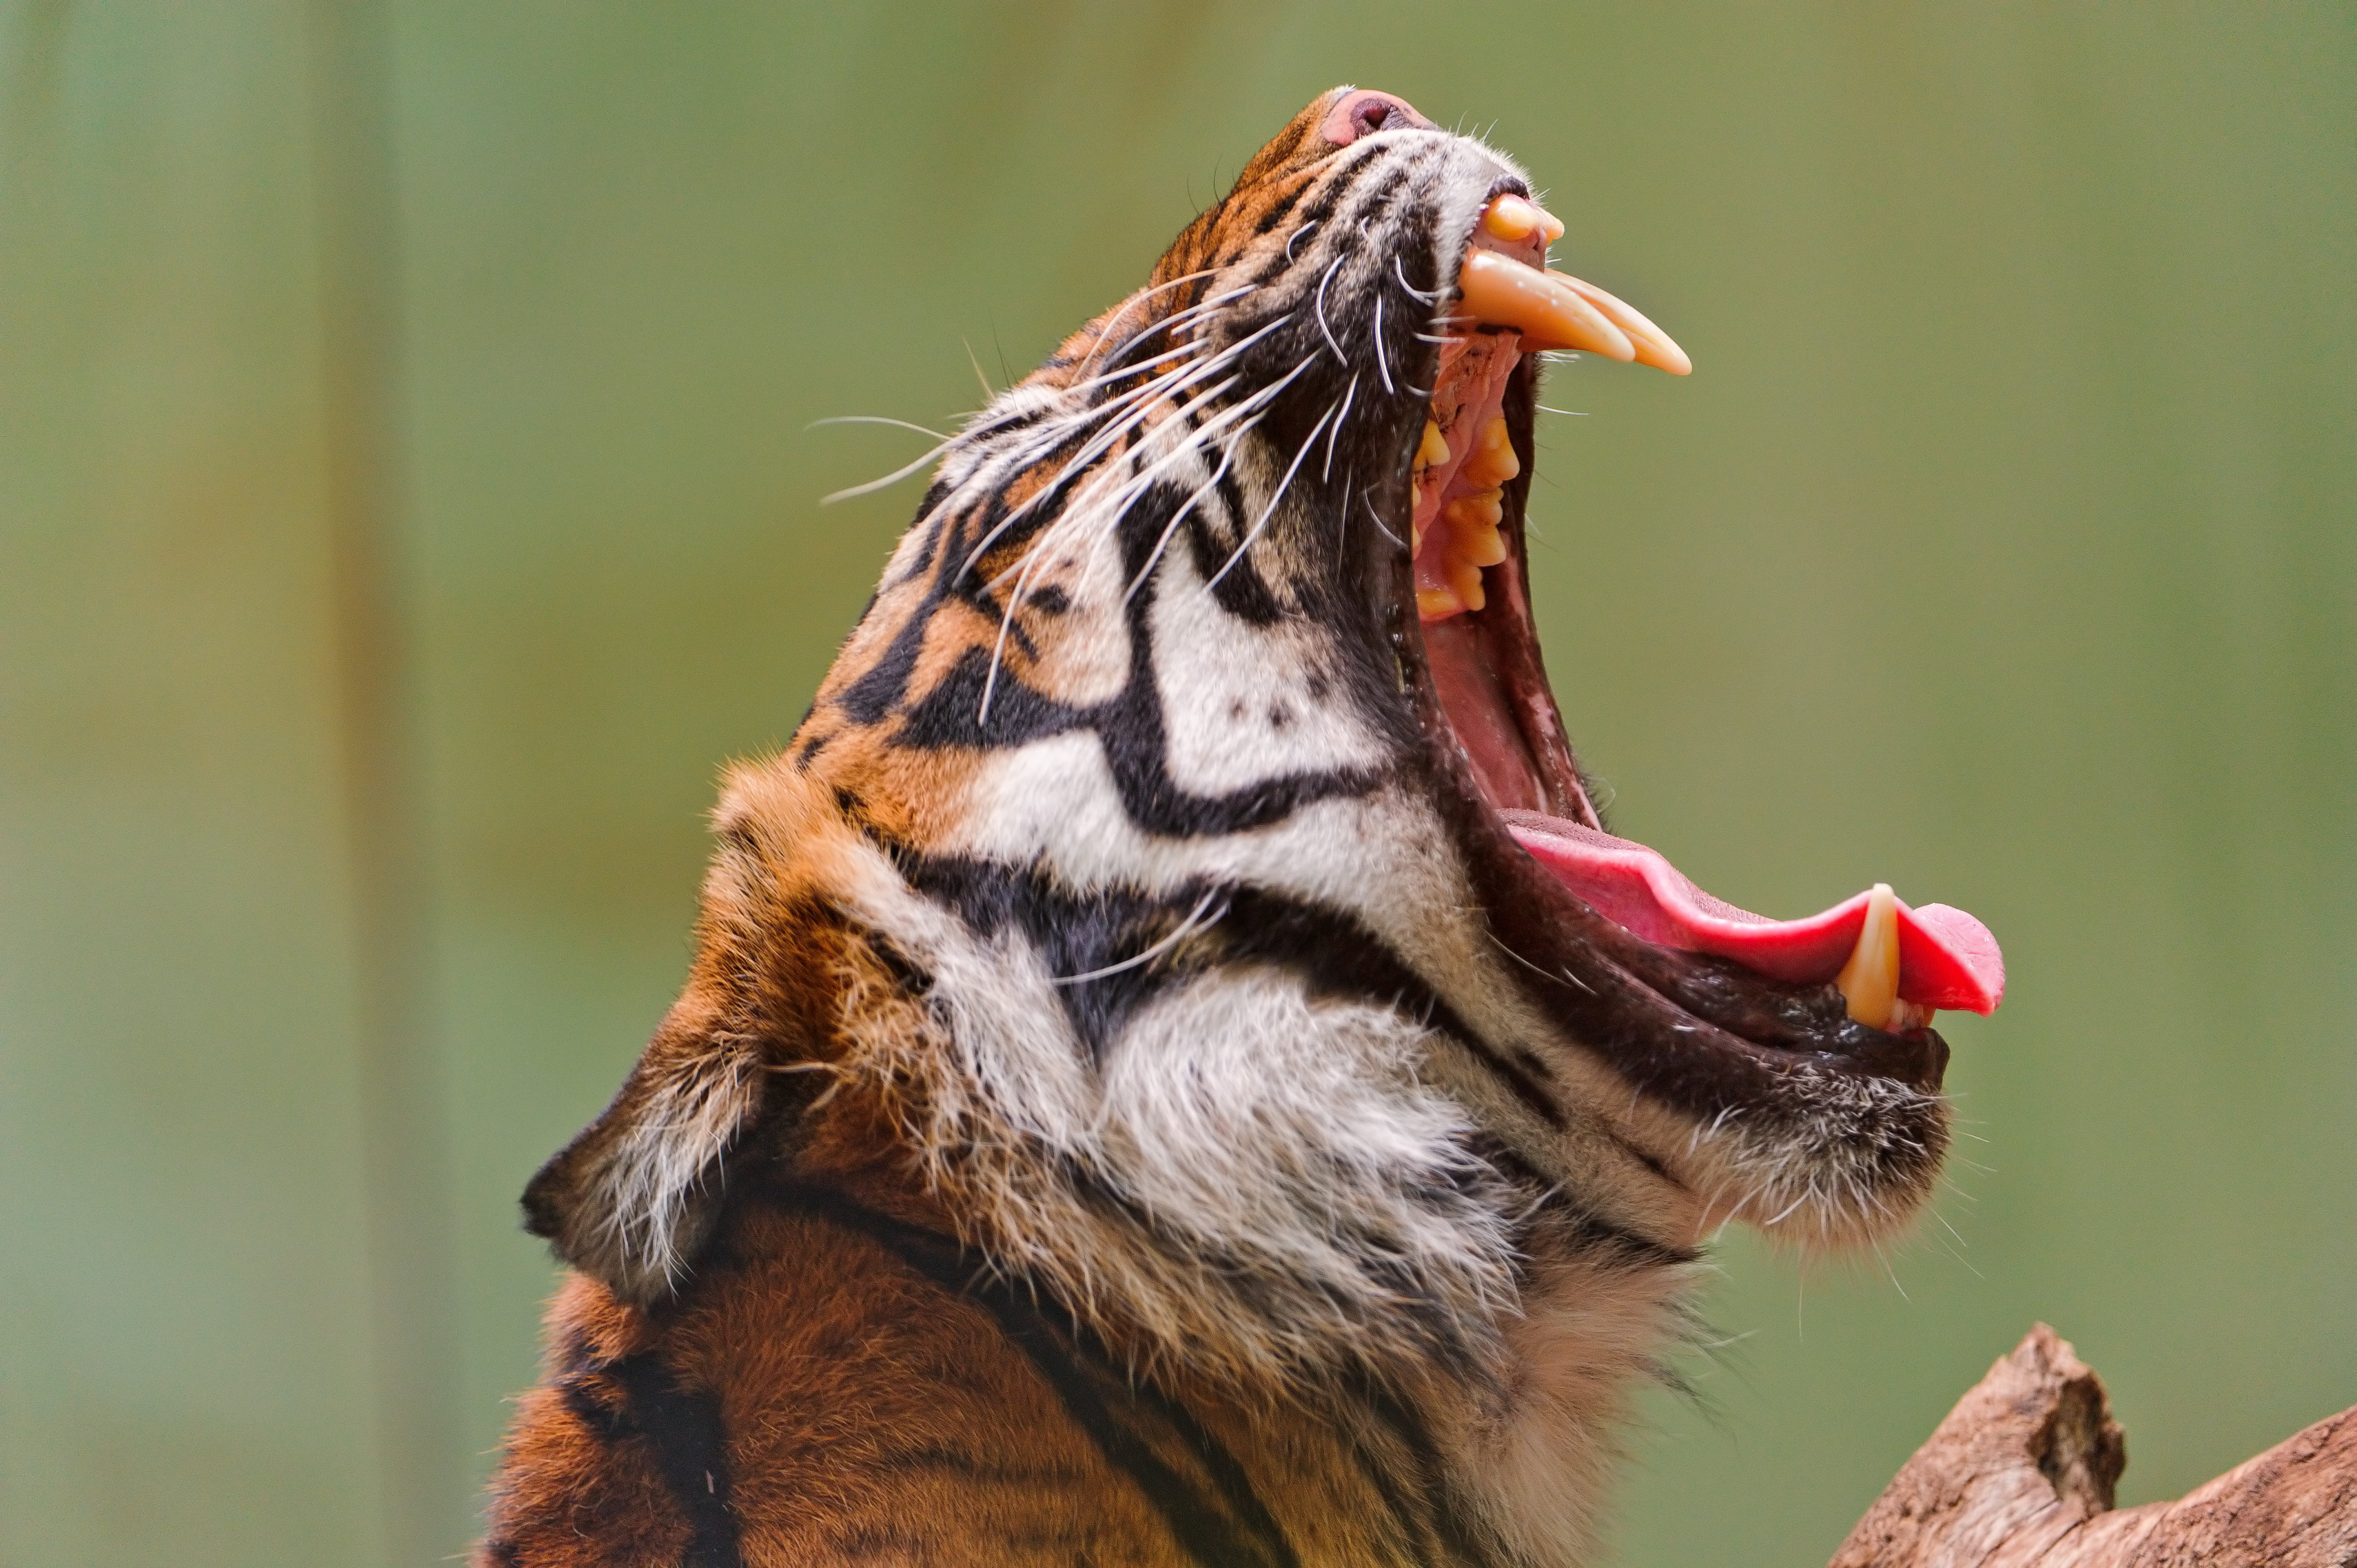 Tiger Roaring During Daytime Hd Wallpaper - Tigers With Open Mouths , HD Wallpaper & Backgrounds